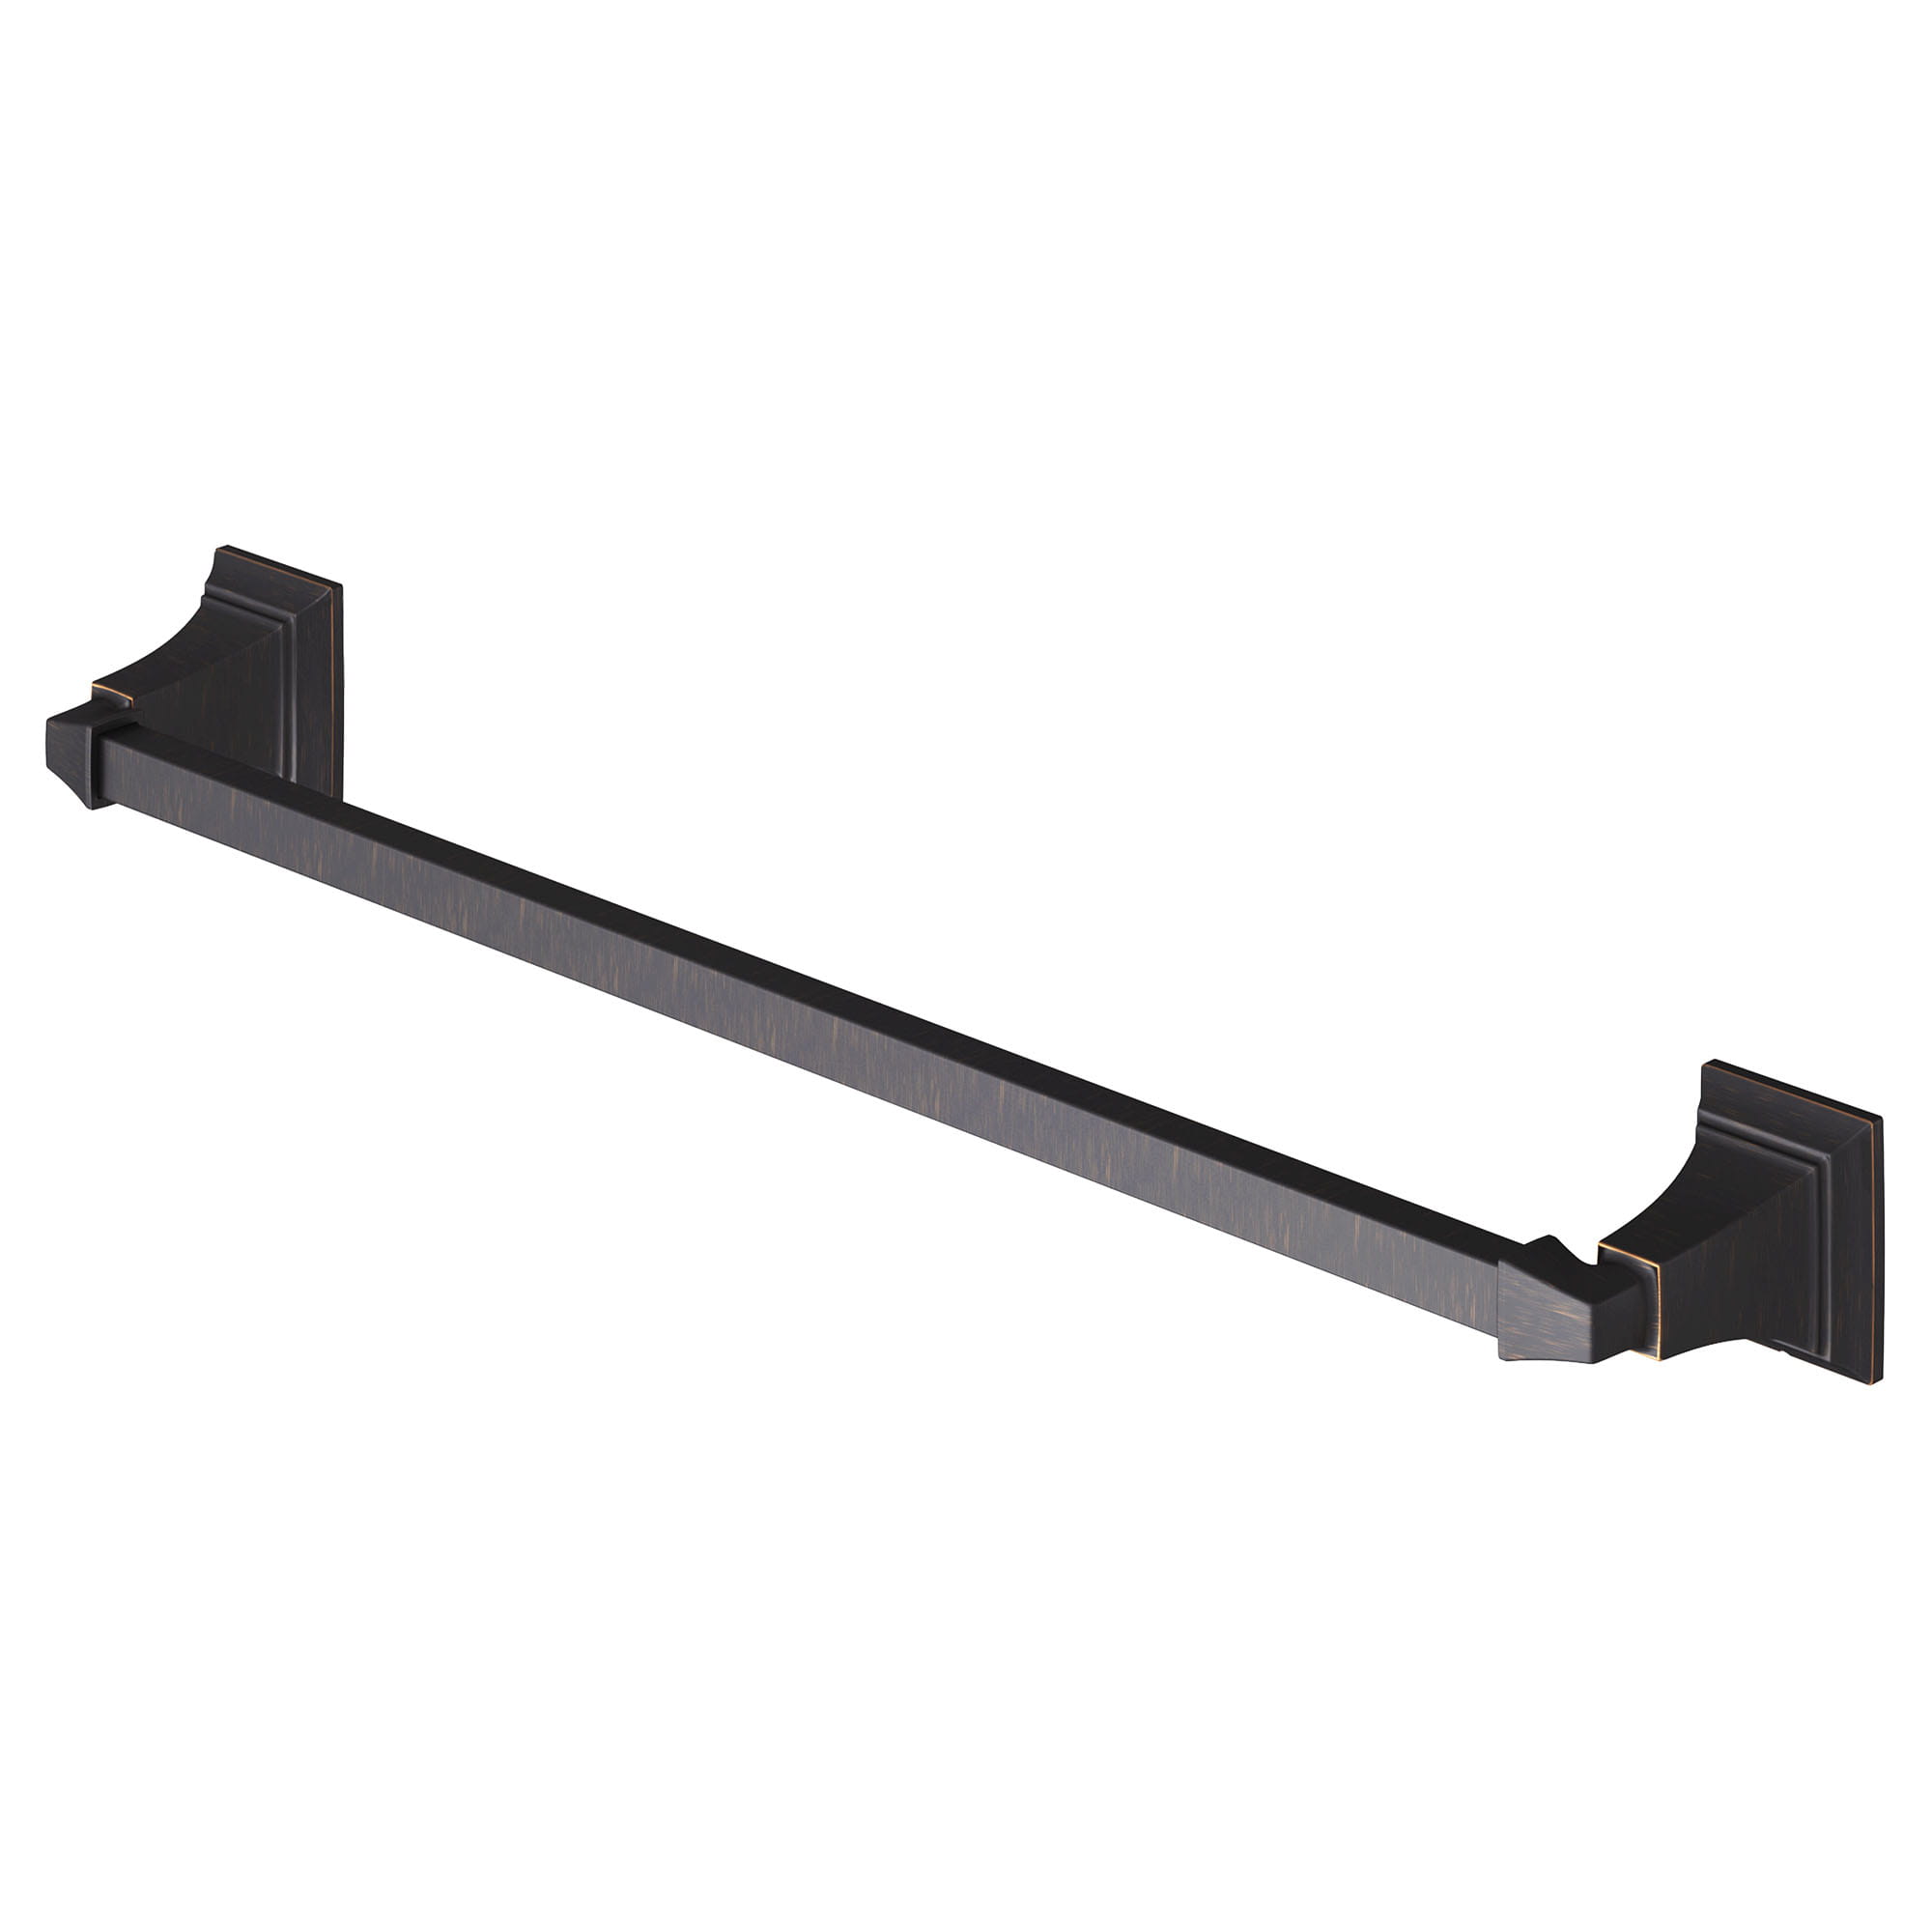 Town Square® S 18-Inch Towel Bar